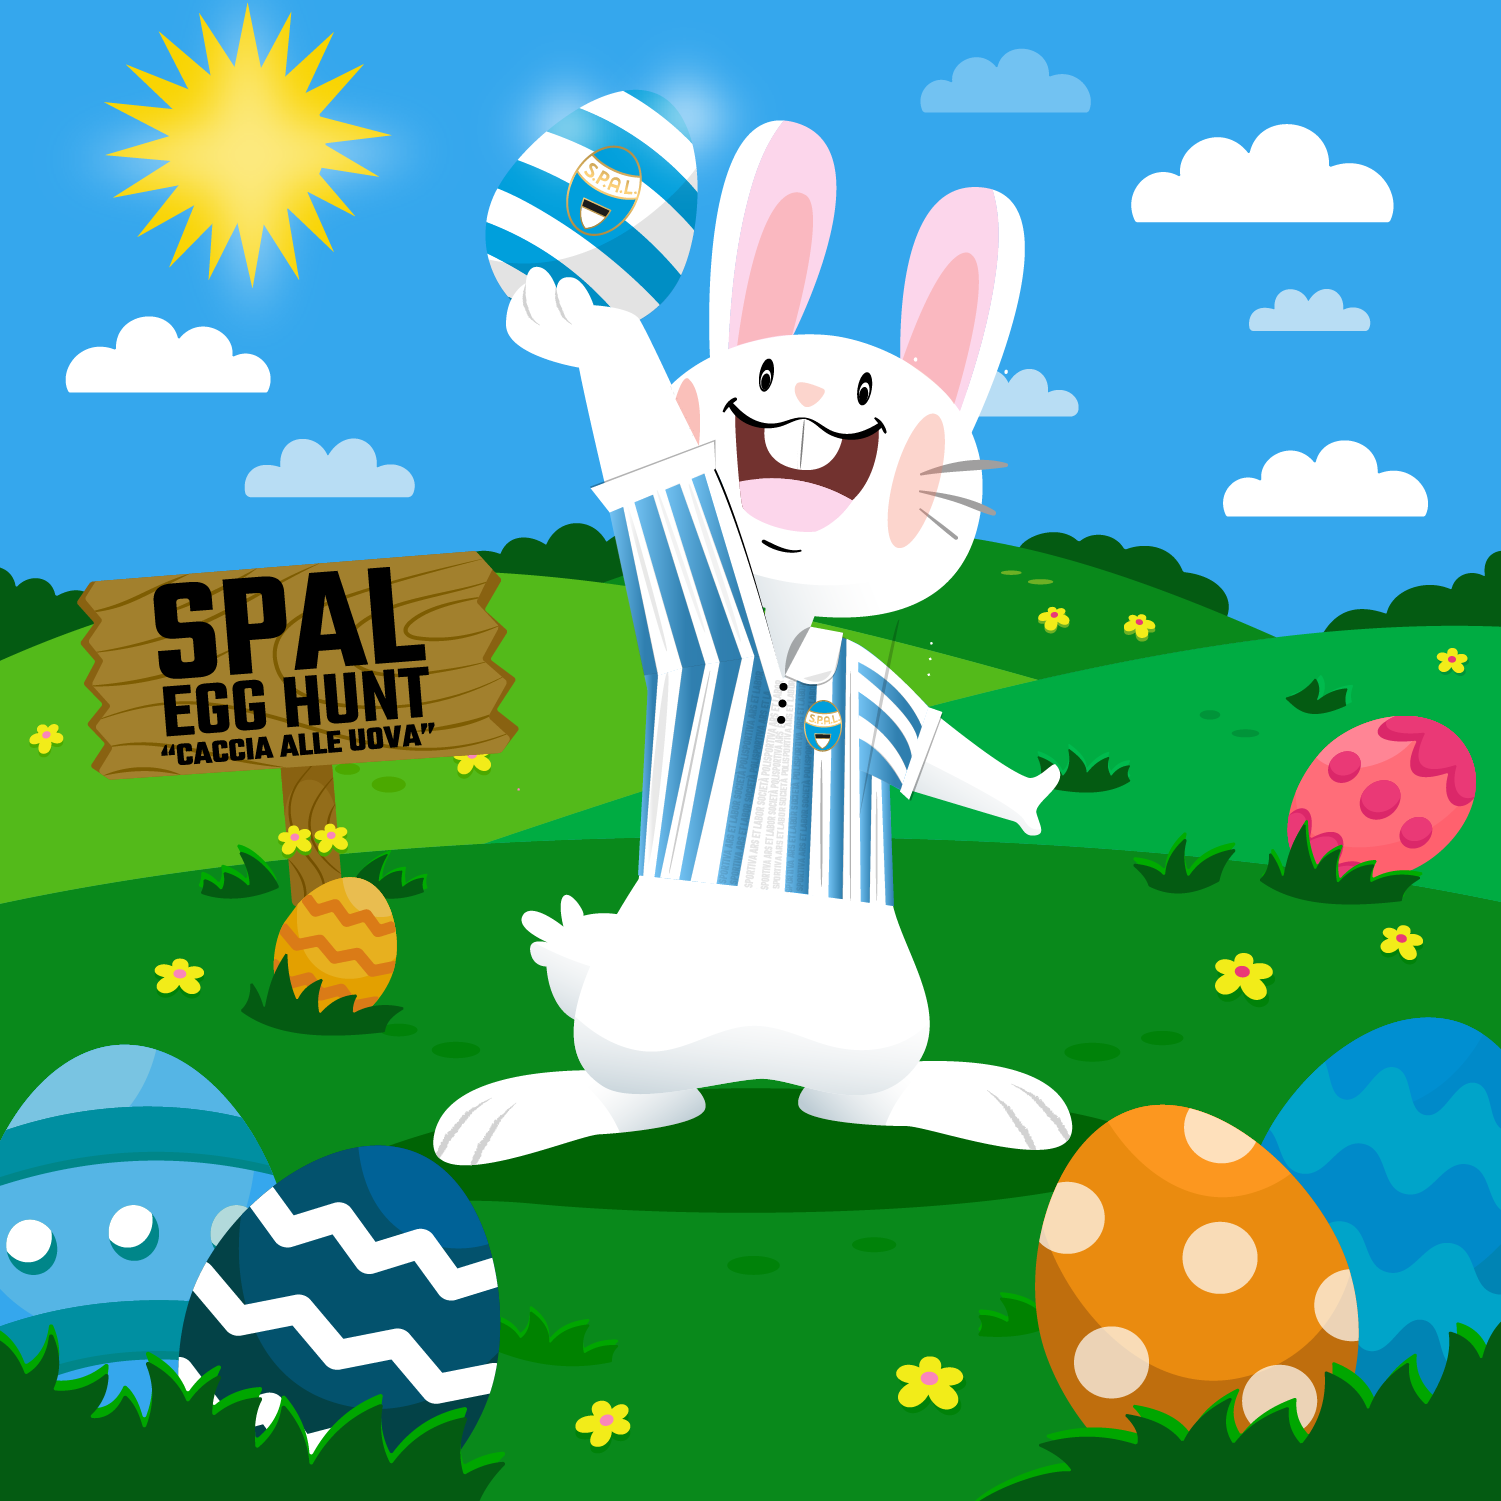 Sunday, April 2 appointment with "SPAL Easter Egg Hunt"